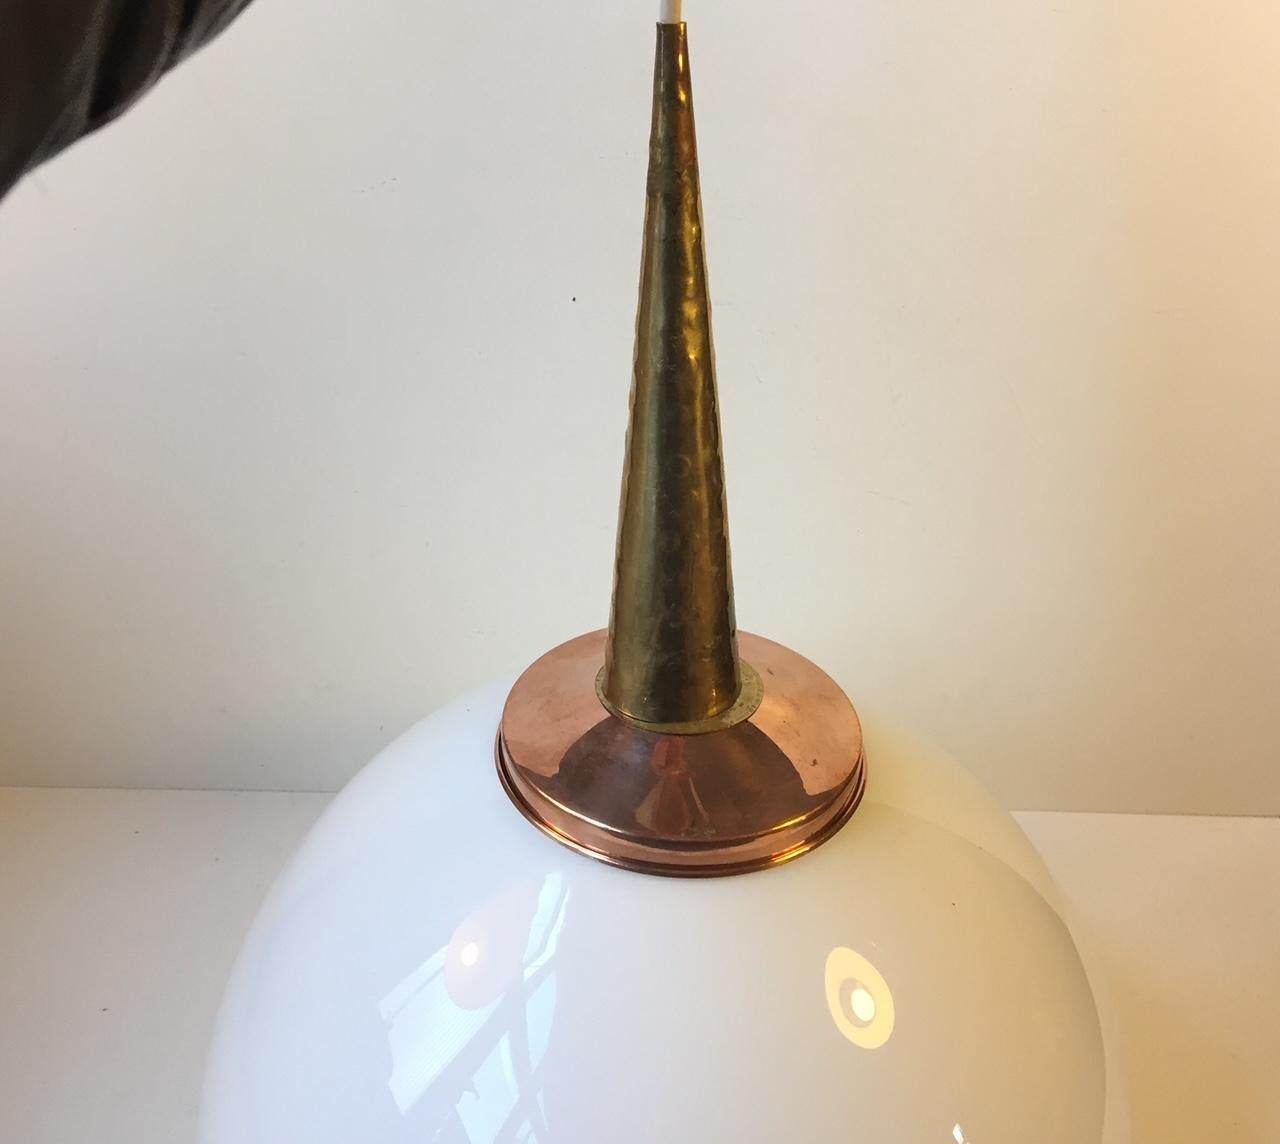 Scandinavian Modern Pendant Lamp in Opaline Glass, Copper and Brass, 1970s In Good Condition For Sale In Esbjerg, DK